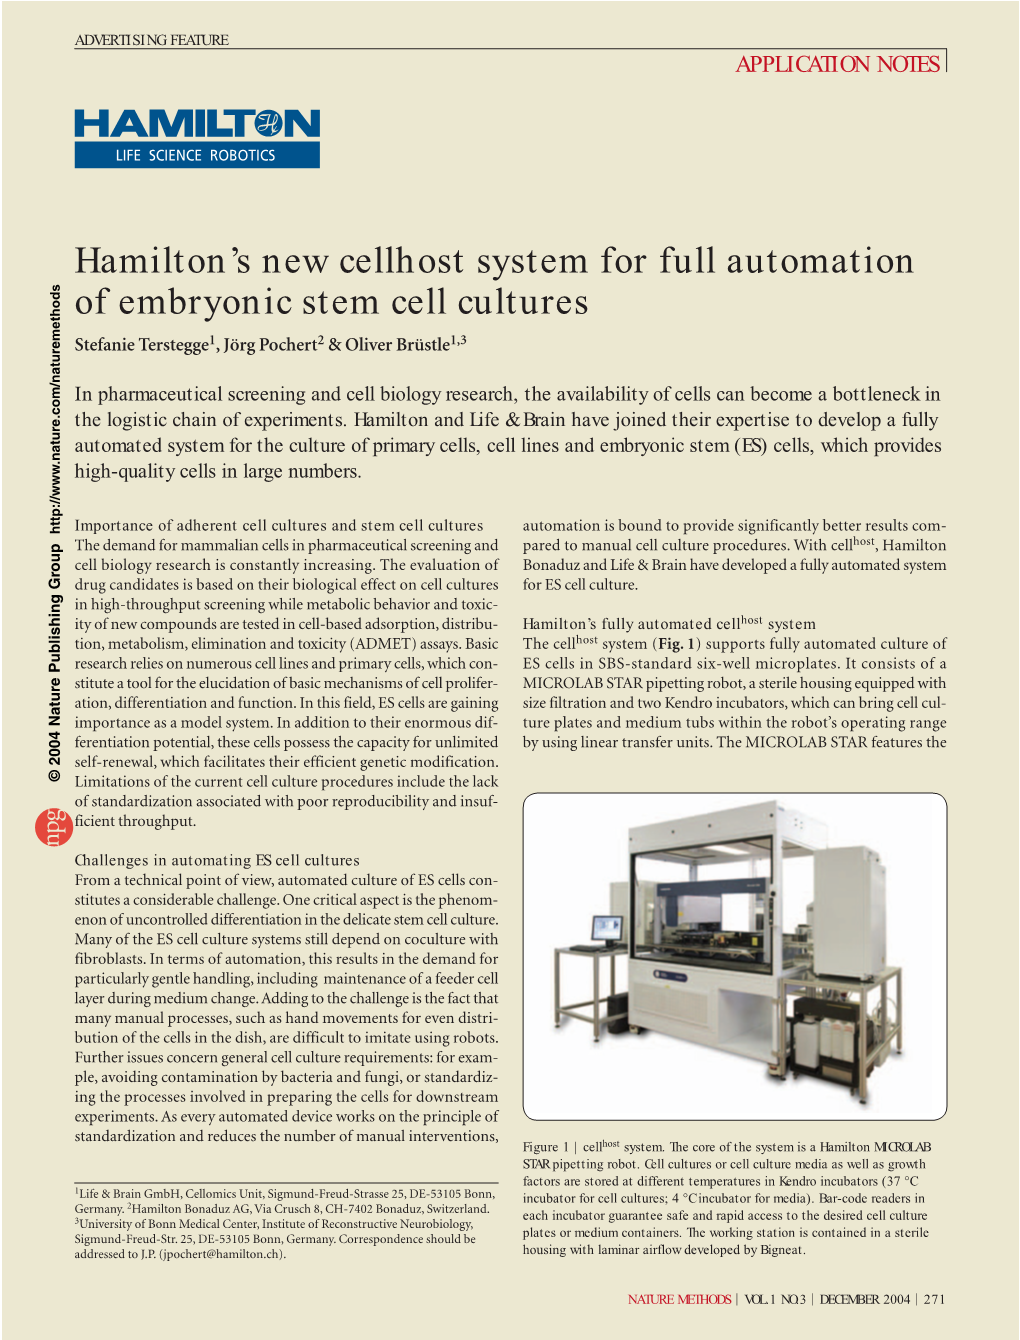 Hamilton's New Cellhost System for Full Automation of Embryonic Stem Cell